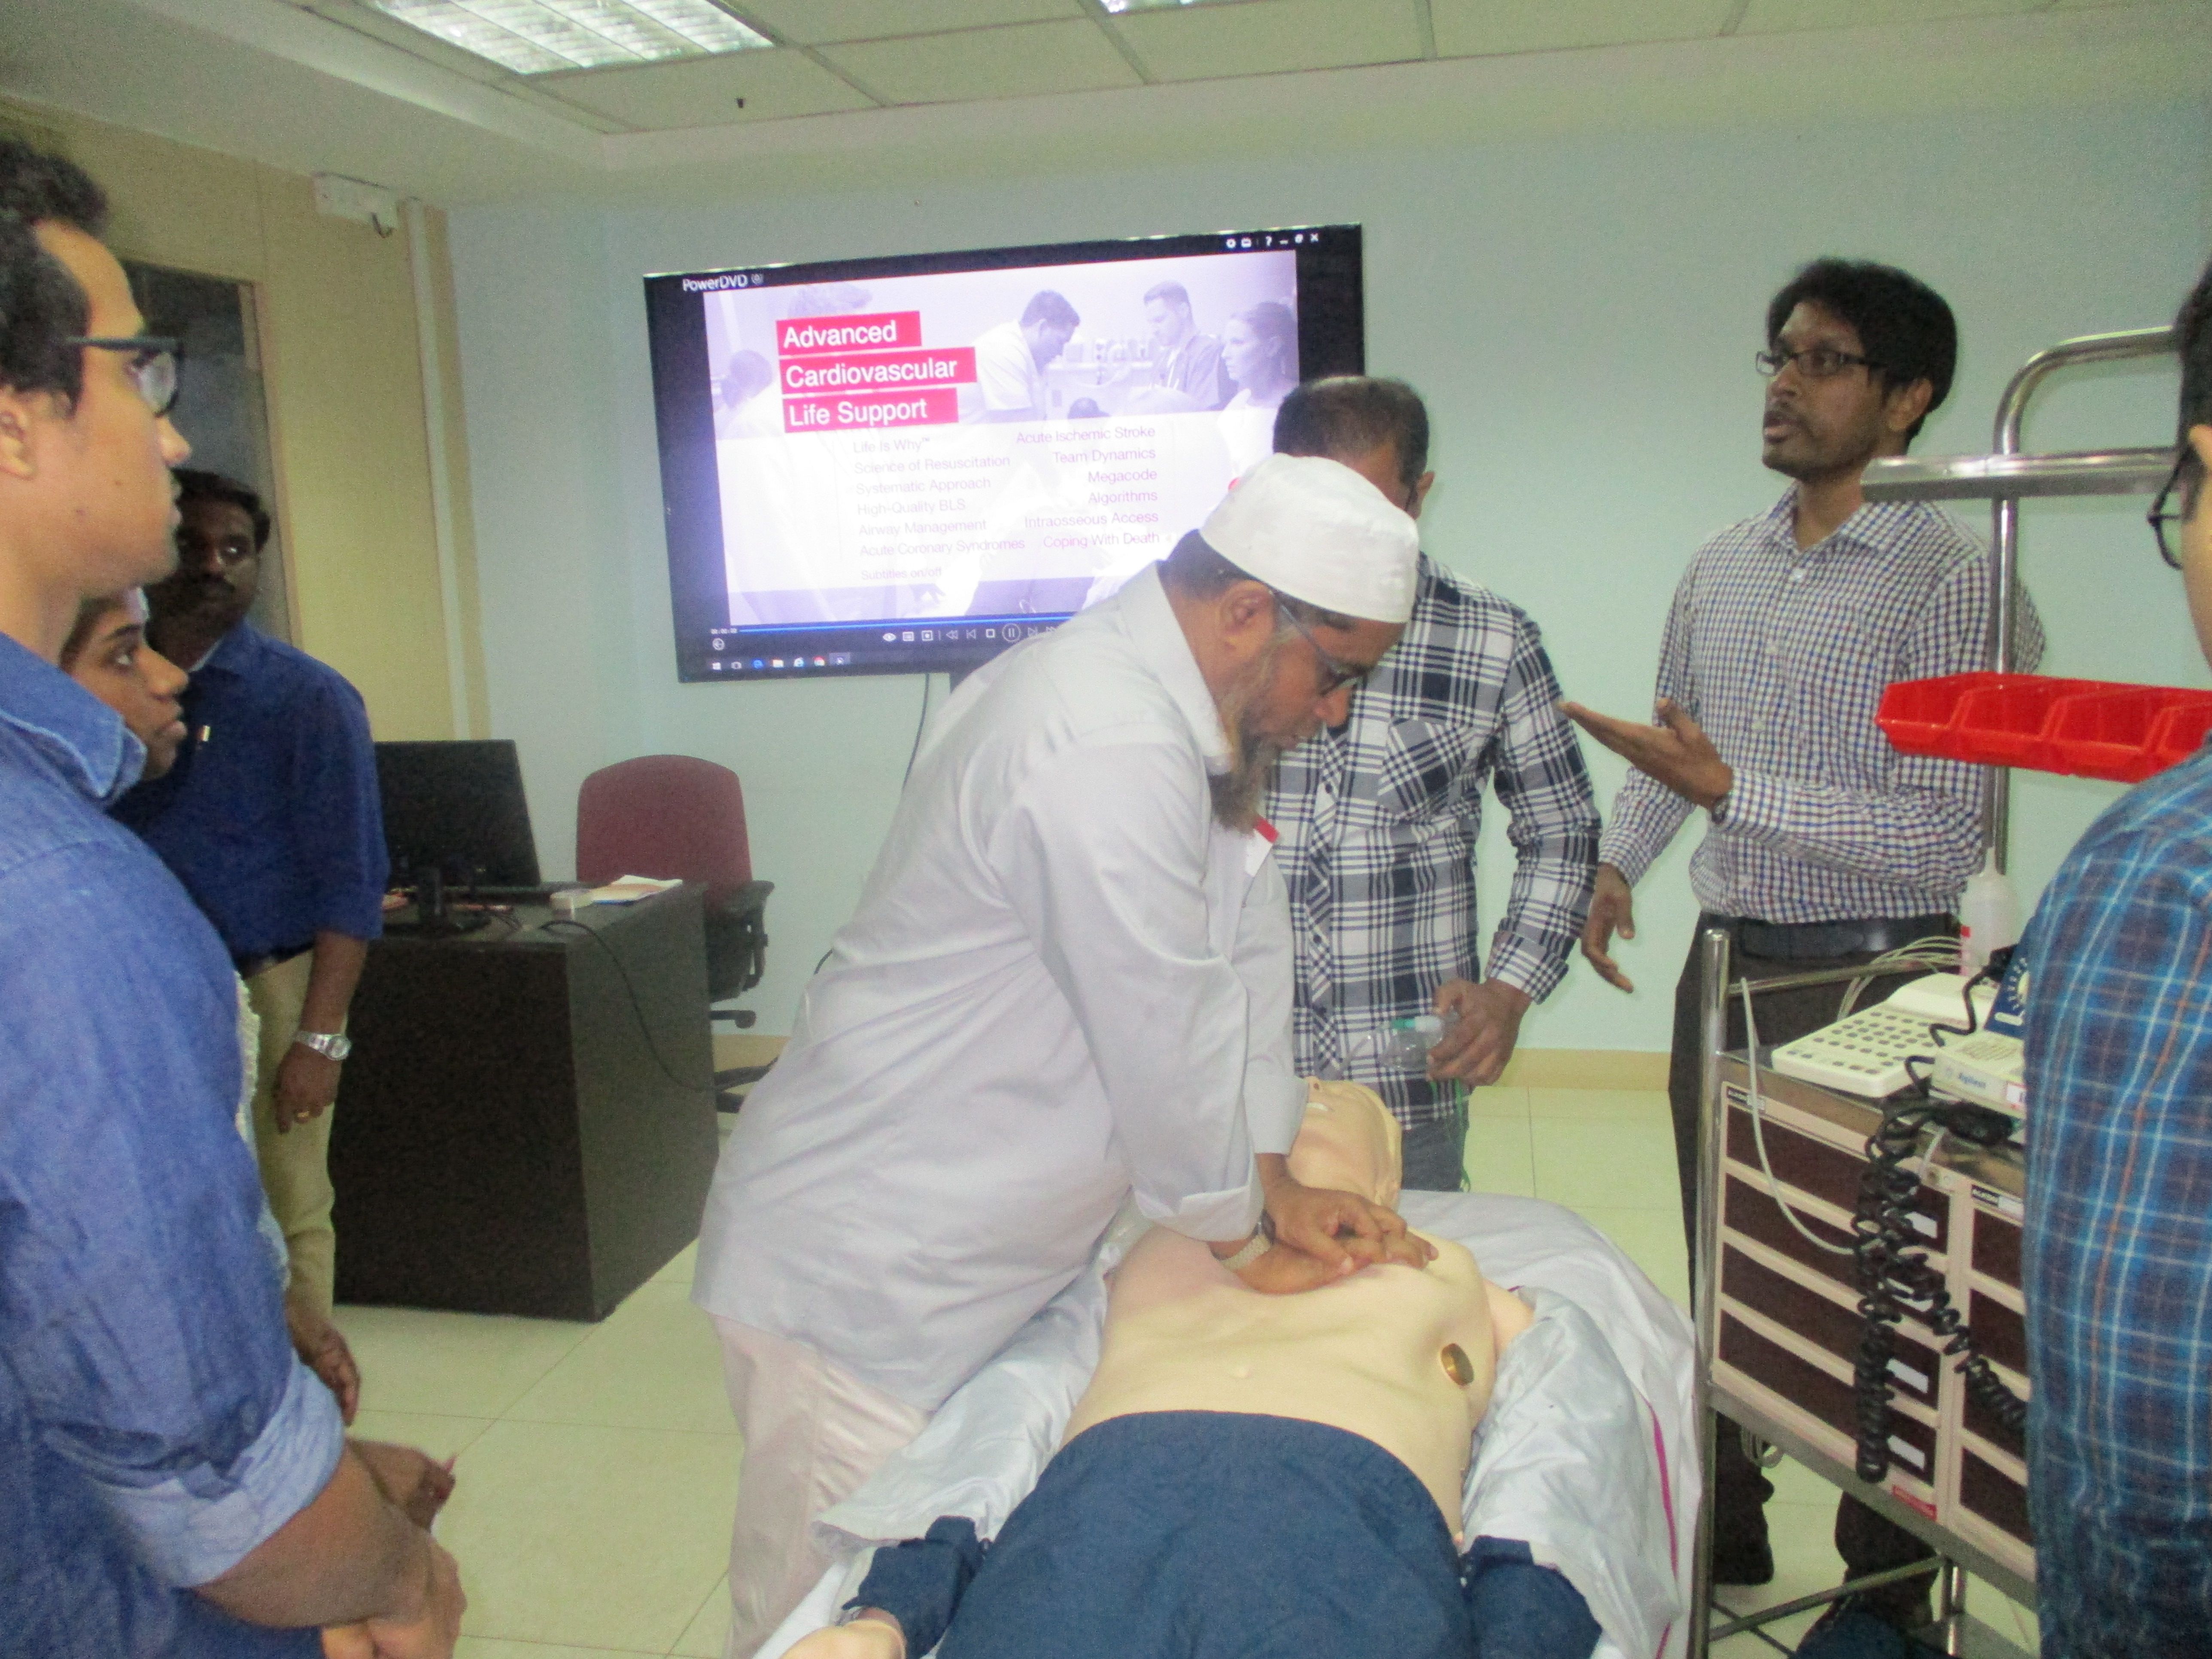 Basic Life Support & Advanced Cardiac Life Support held from 15-05-2019 to 17-05-2019 in the CIHS.